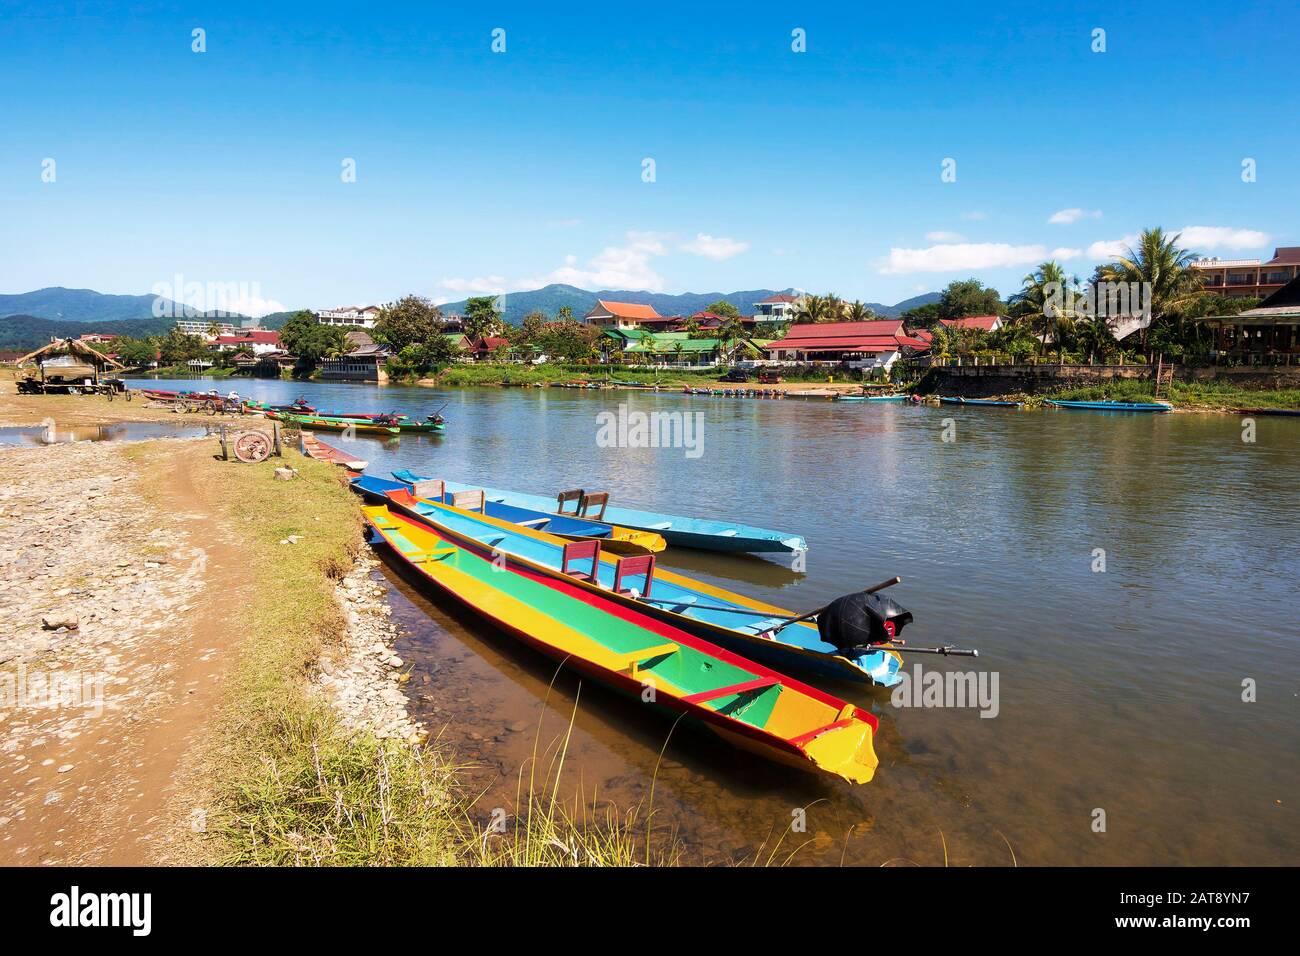 Boats on the Song River in Vang Vieng, Laos. Stock Photo